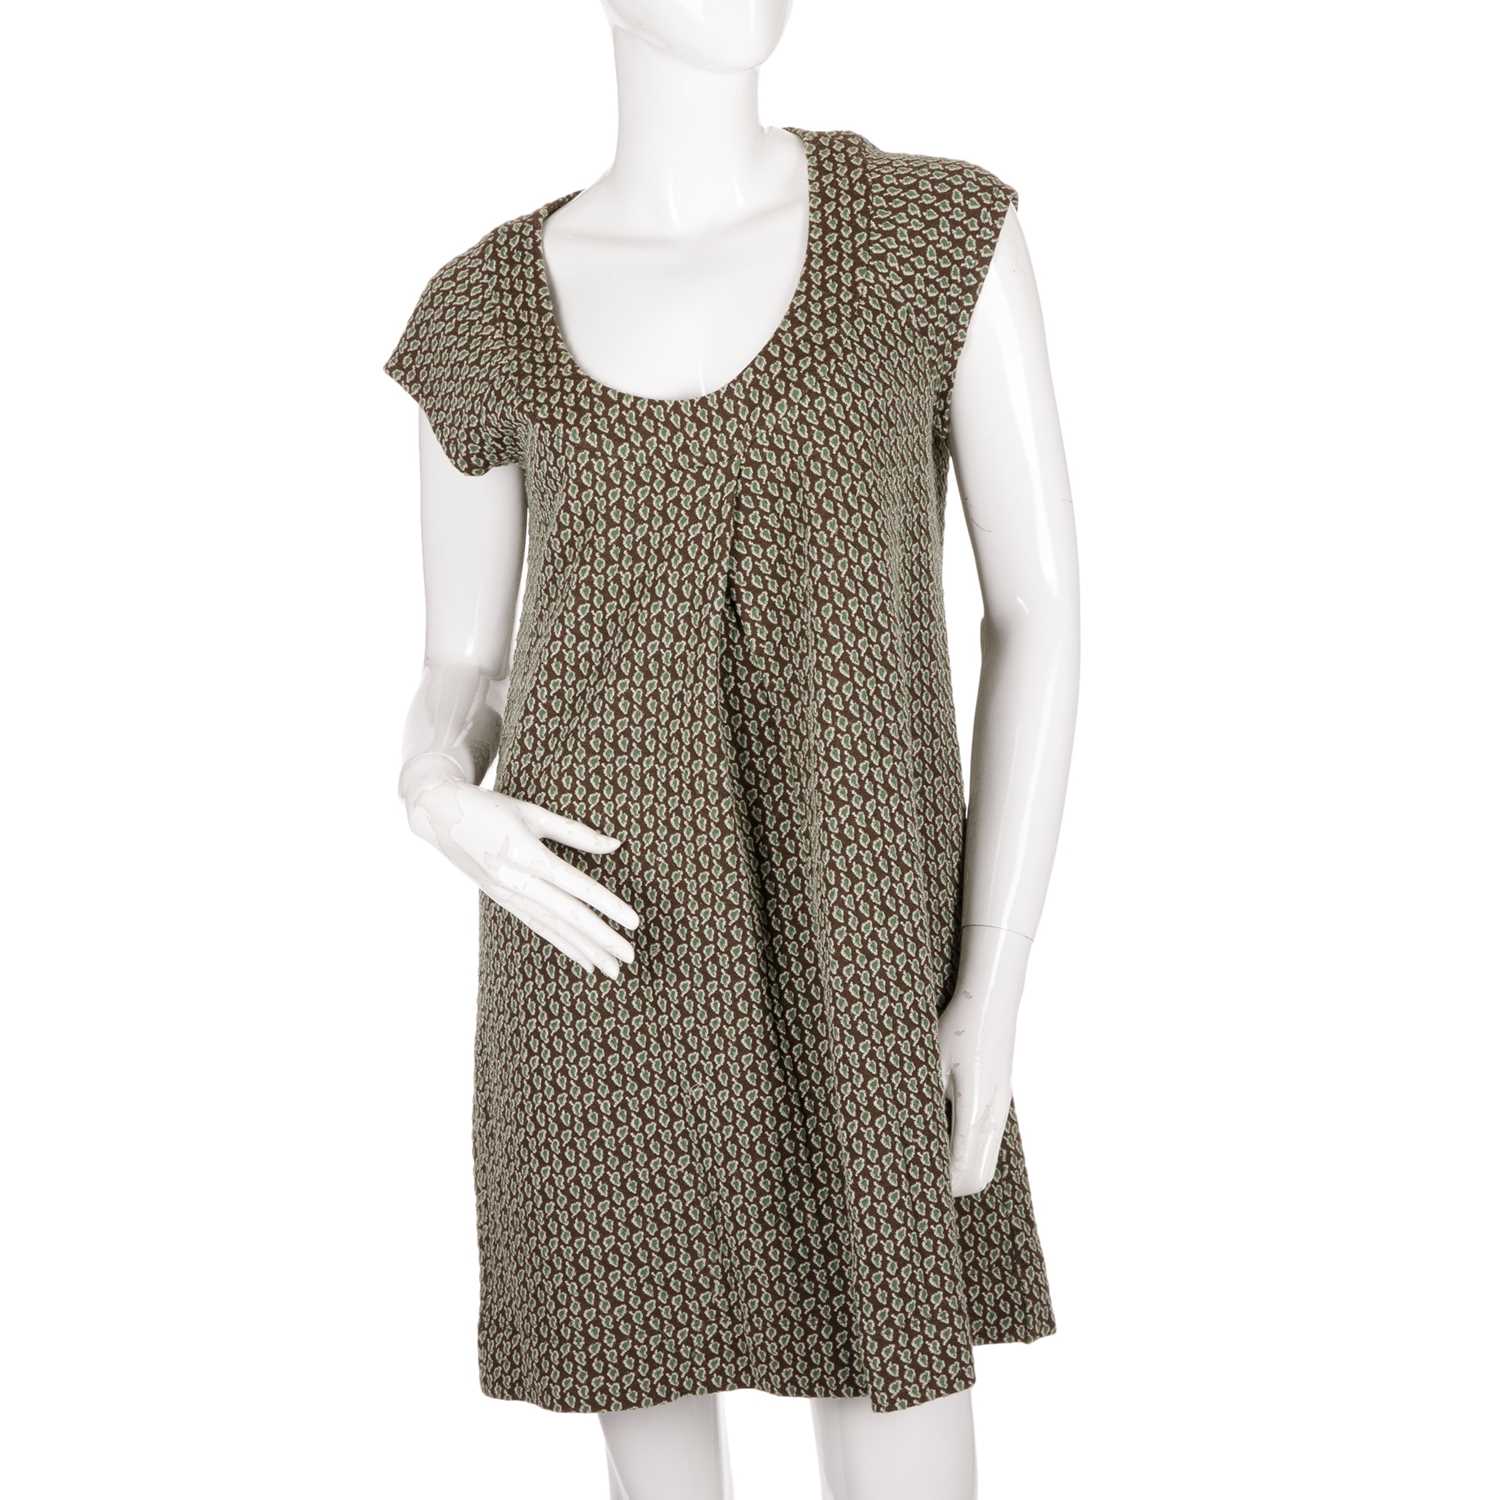 Diane Von Furstenberg, a selection of ladies clothing, to include a brown and green patterned - Image 10 of 12